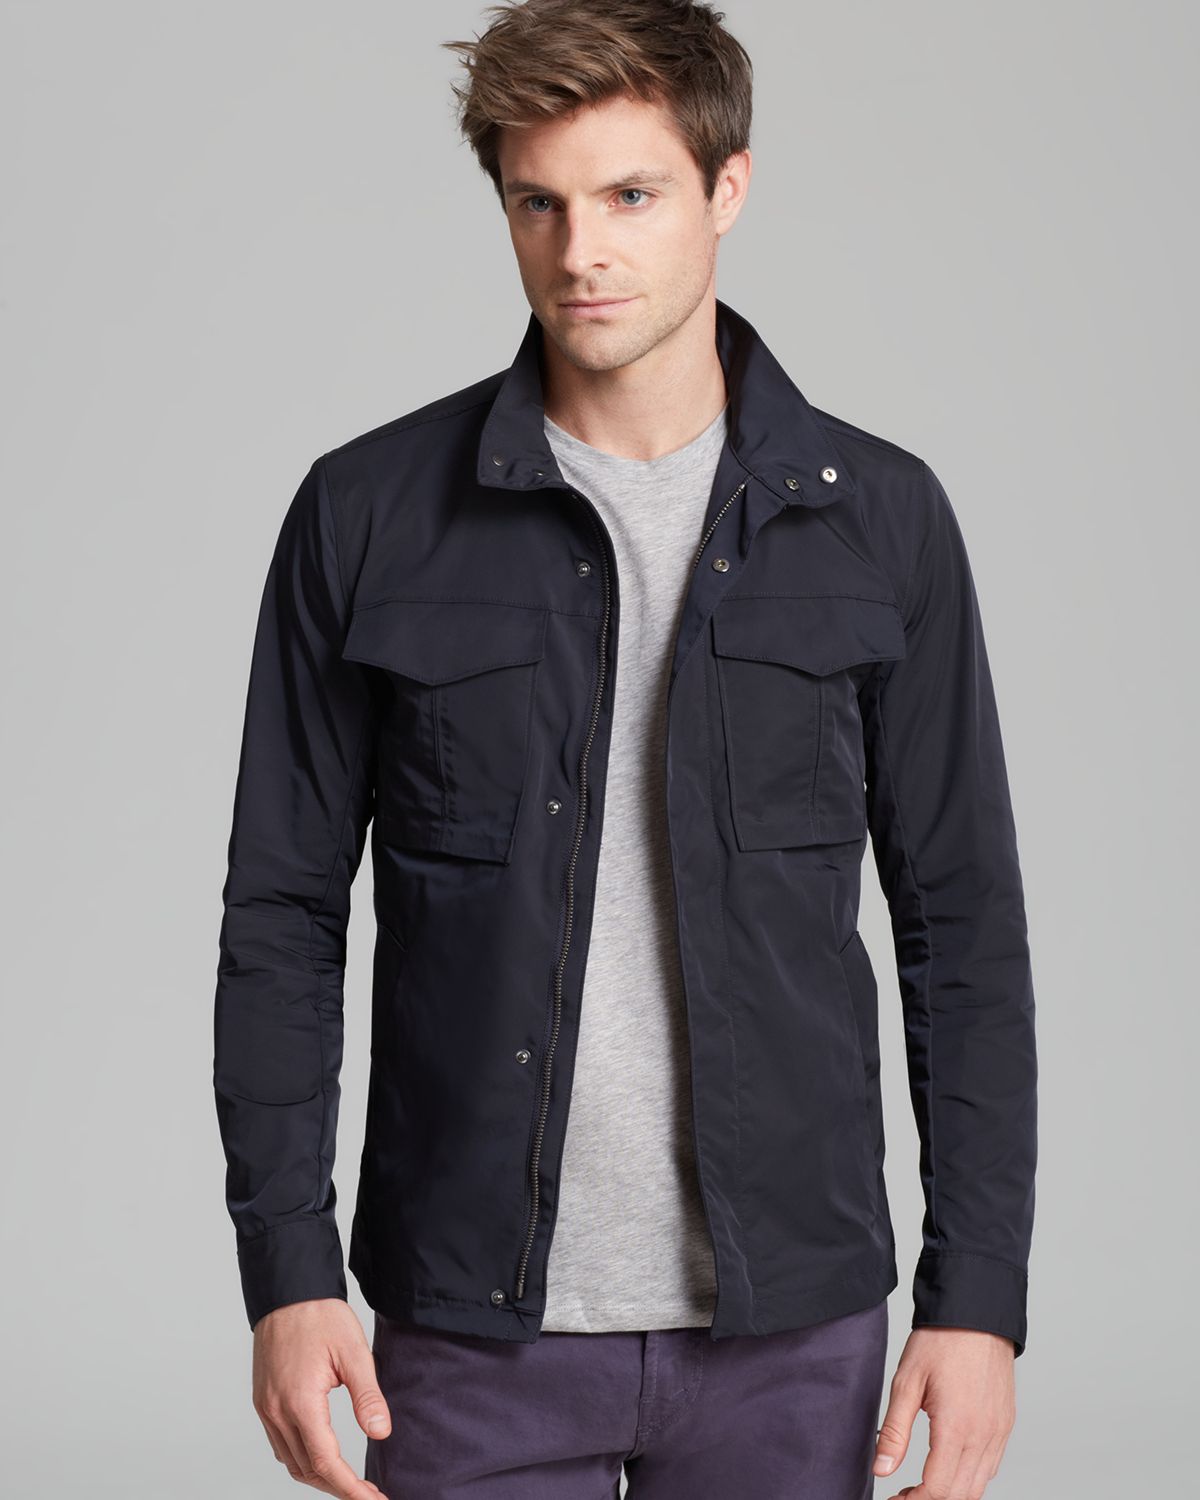 Lyst - Theory Yost N Fuel Jacket in Blue for Men - Save 23%